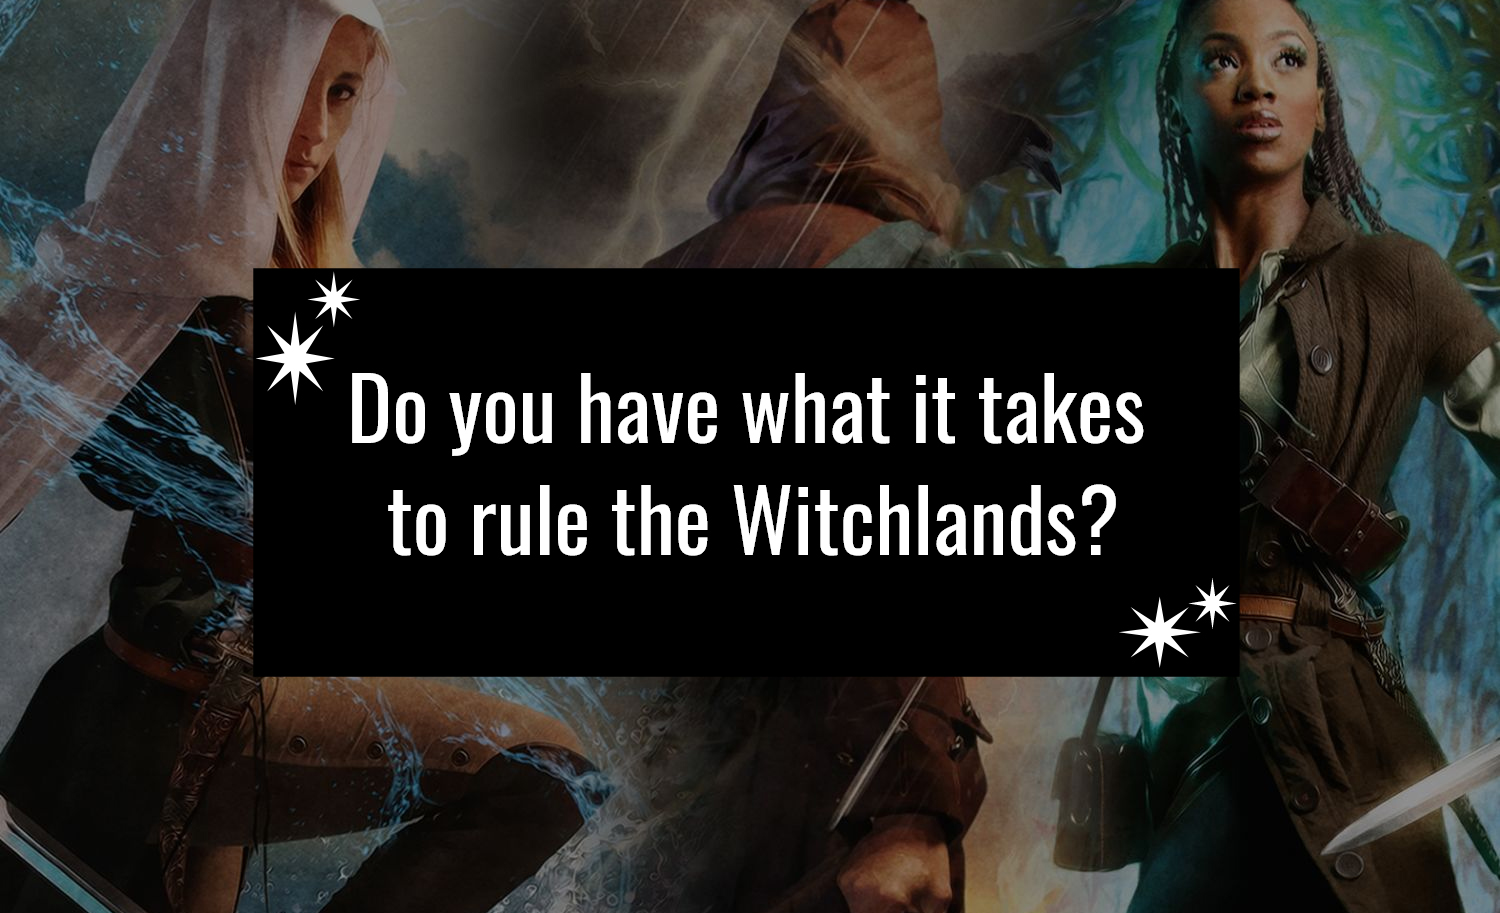 Do You Have What It Takes to Rule the Witchlands?